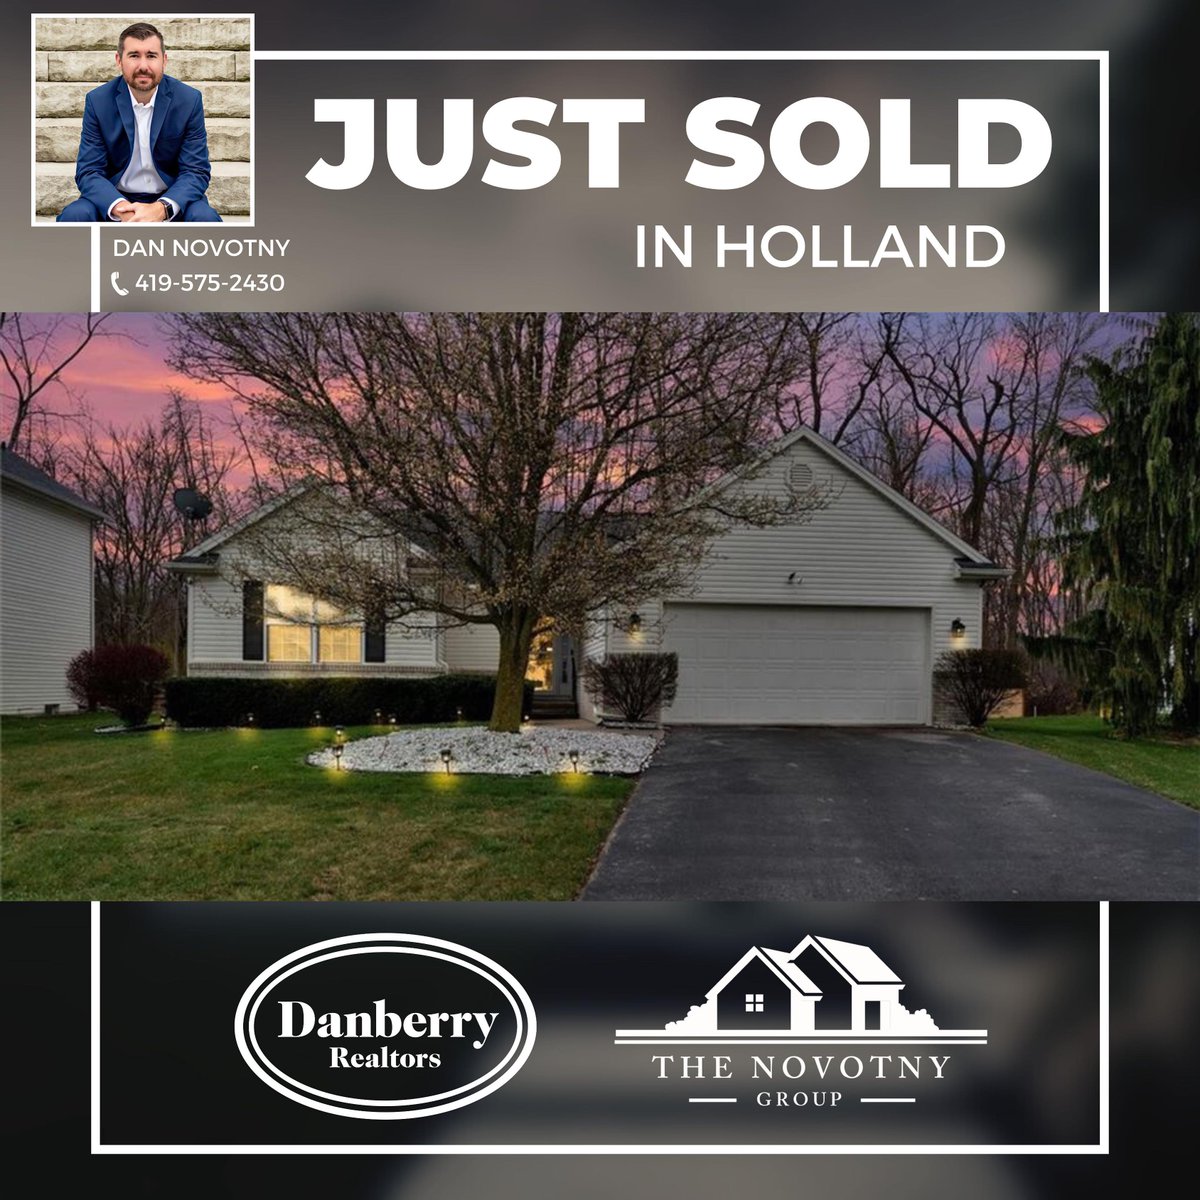 ✨✨Just Sold✨✨ Congrats to my buyers on closing this beautiful Holland Home!! 🏠 💯 #happy #realtorlife #grateful #bravo #closing #realtor #justsold #🏡 #dannovotny #sold #dothework #firsttimehomebuyer #maumee #happybuyer #millennials #thenovotnygroup… dlvr.it/T6VS7y